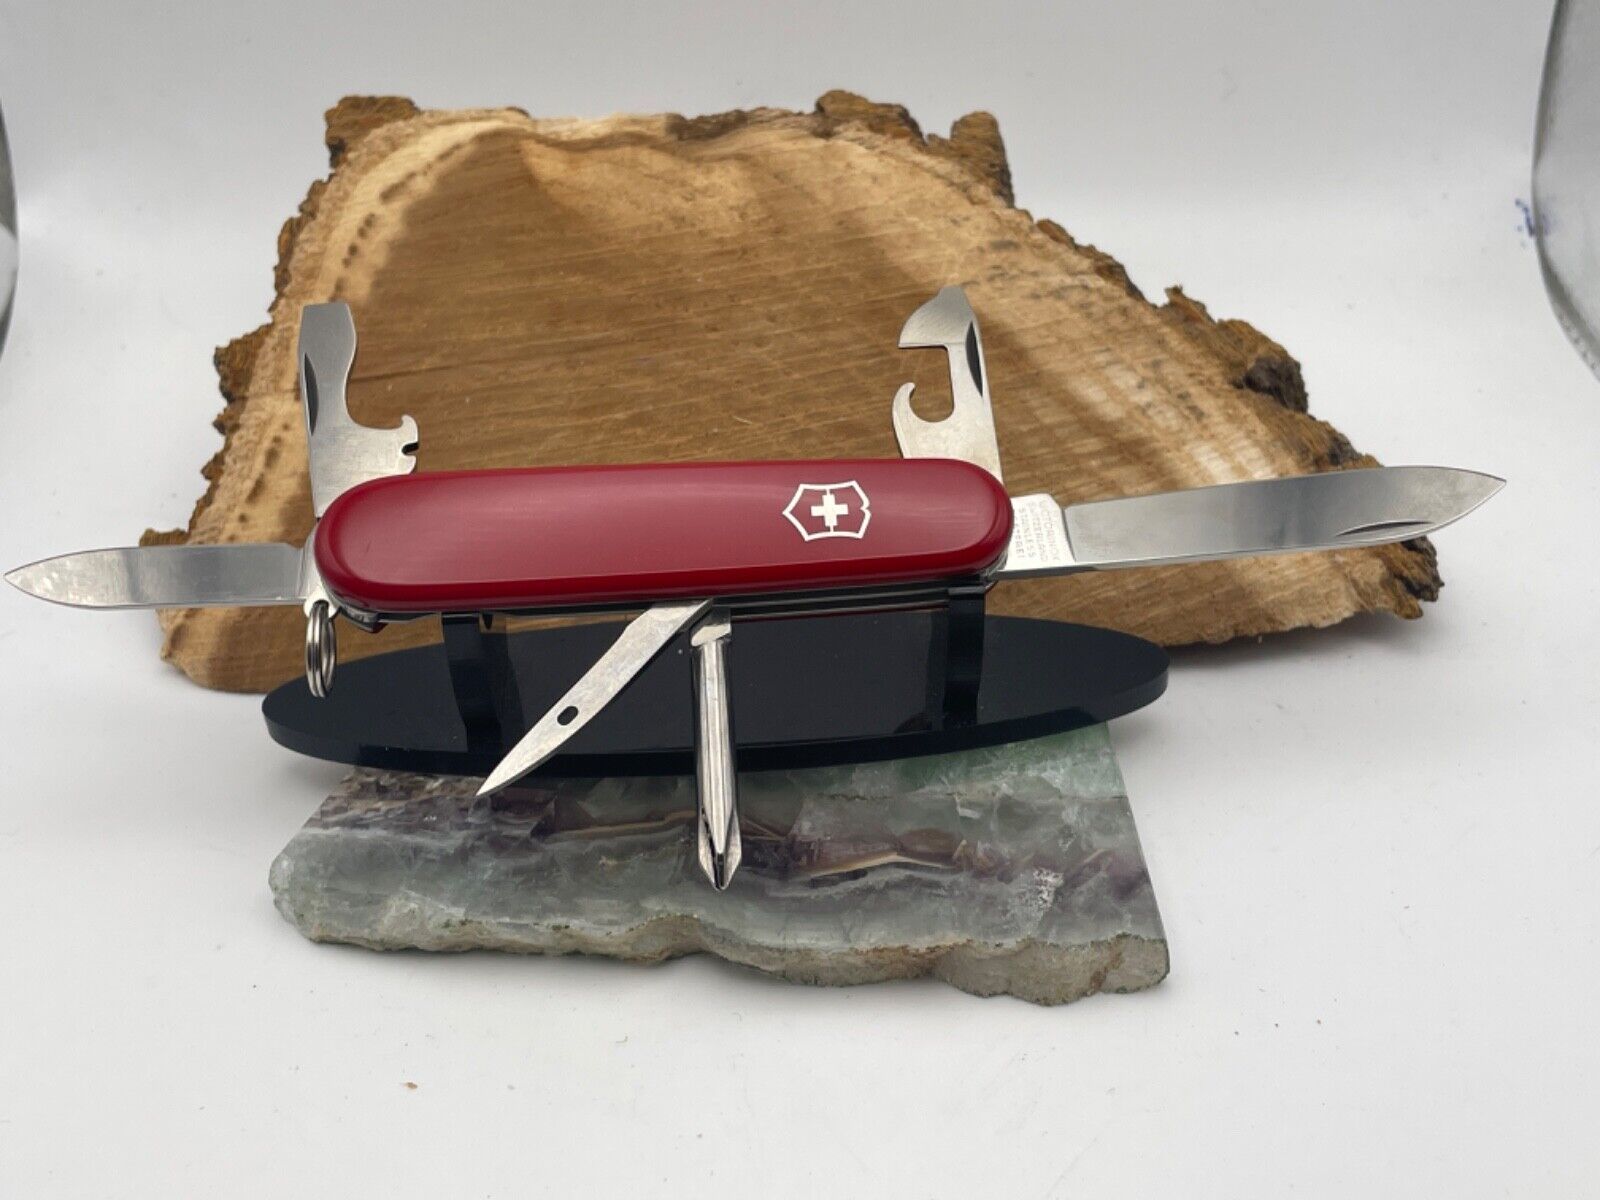 Vintage Victorinox Swiss Army Tinker Red Multitool Knife NOS Box--1306.24